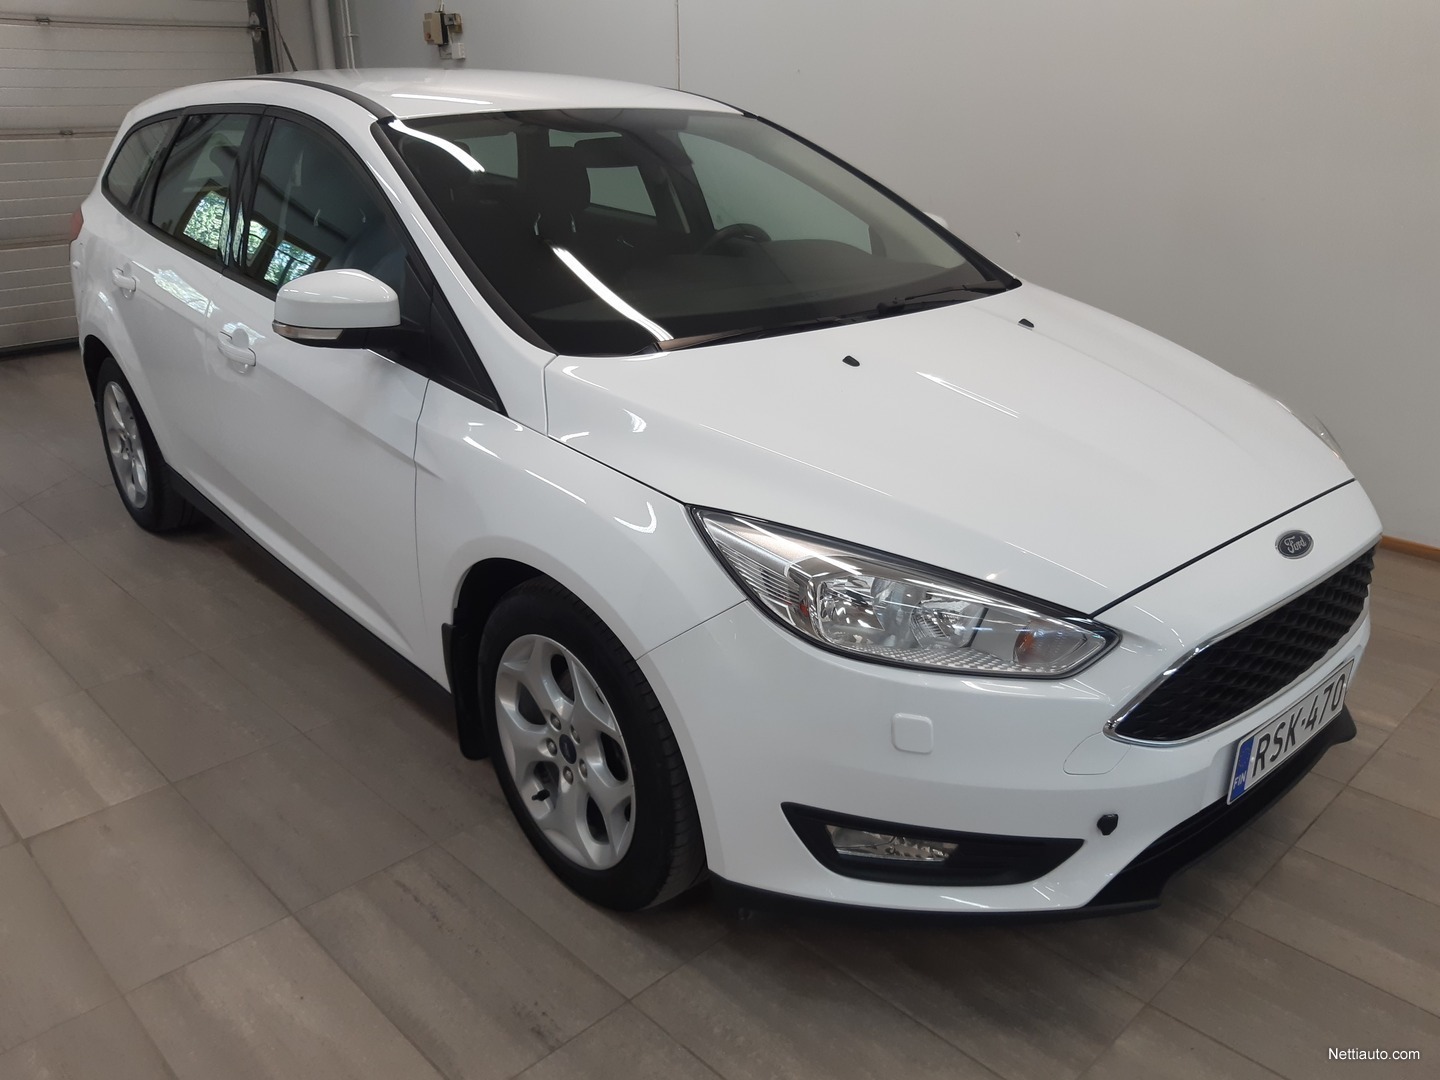 Ford Focus 1,0 EcoBoost 125 hv Start/Stop A6 Trend Wagon Station Wagon 2016  - Used vehicle - Nettiauto